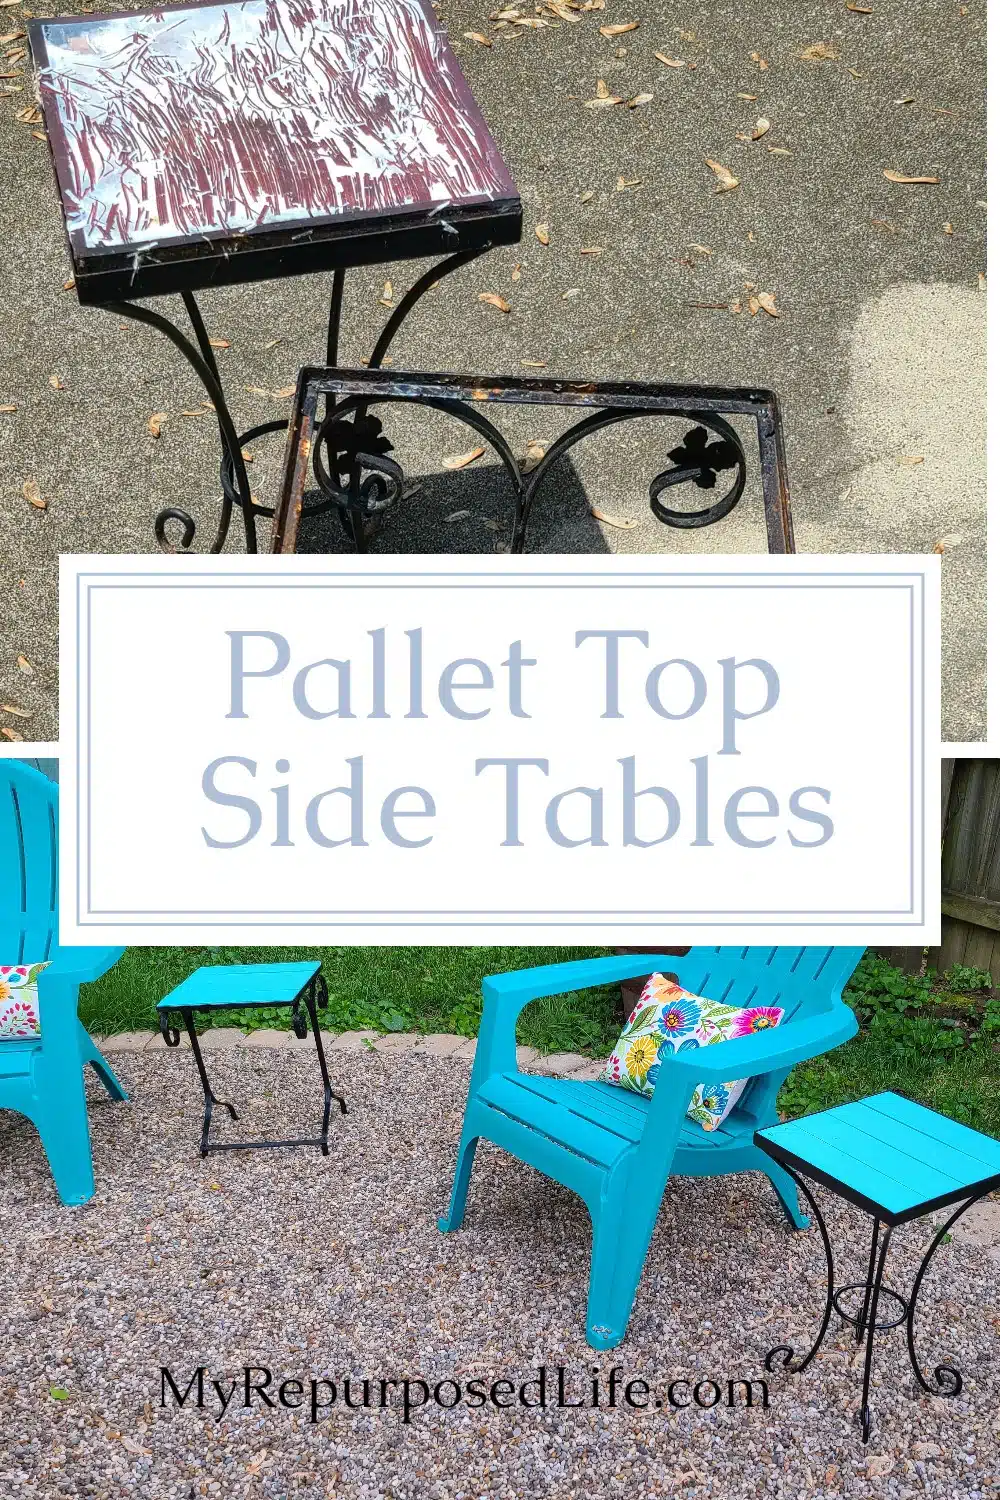 Pallet Top Side Tables for Outdoors is a complete tutorial on how to repurpose a metal side table by adding a new pallet table top. Do It Yourself! #MyRepurposedLife #repurposed #pallet #tables #outdoors #DIY via @repurposedlife